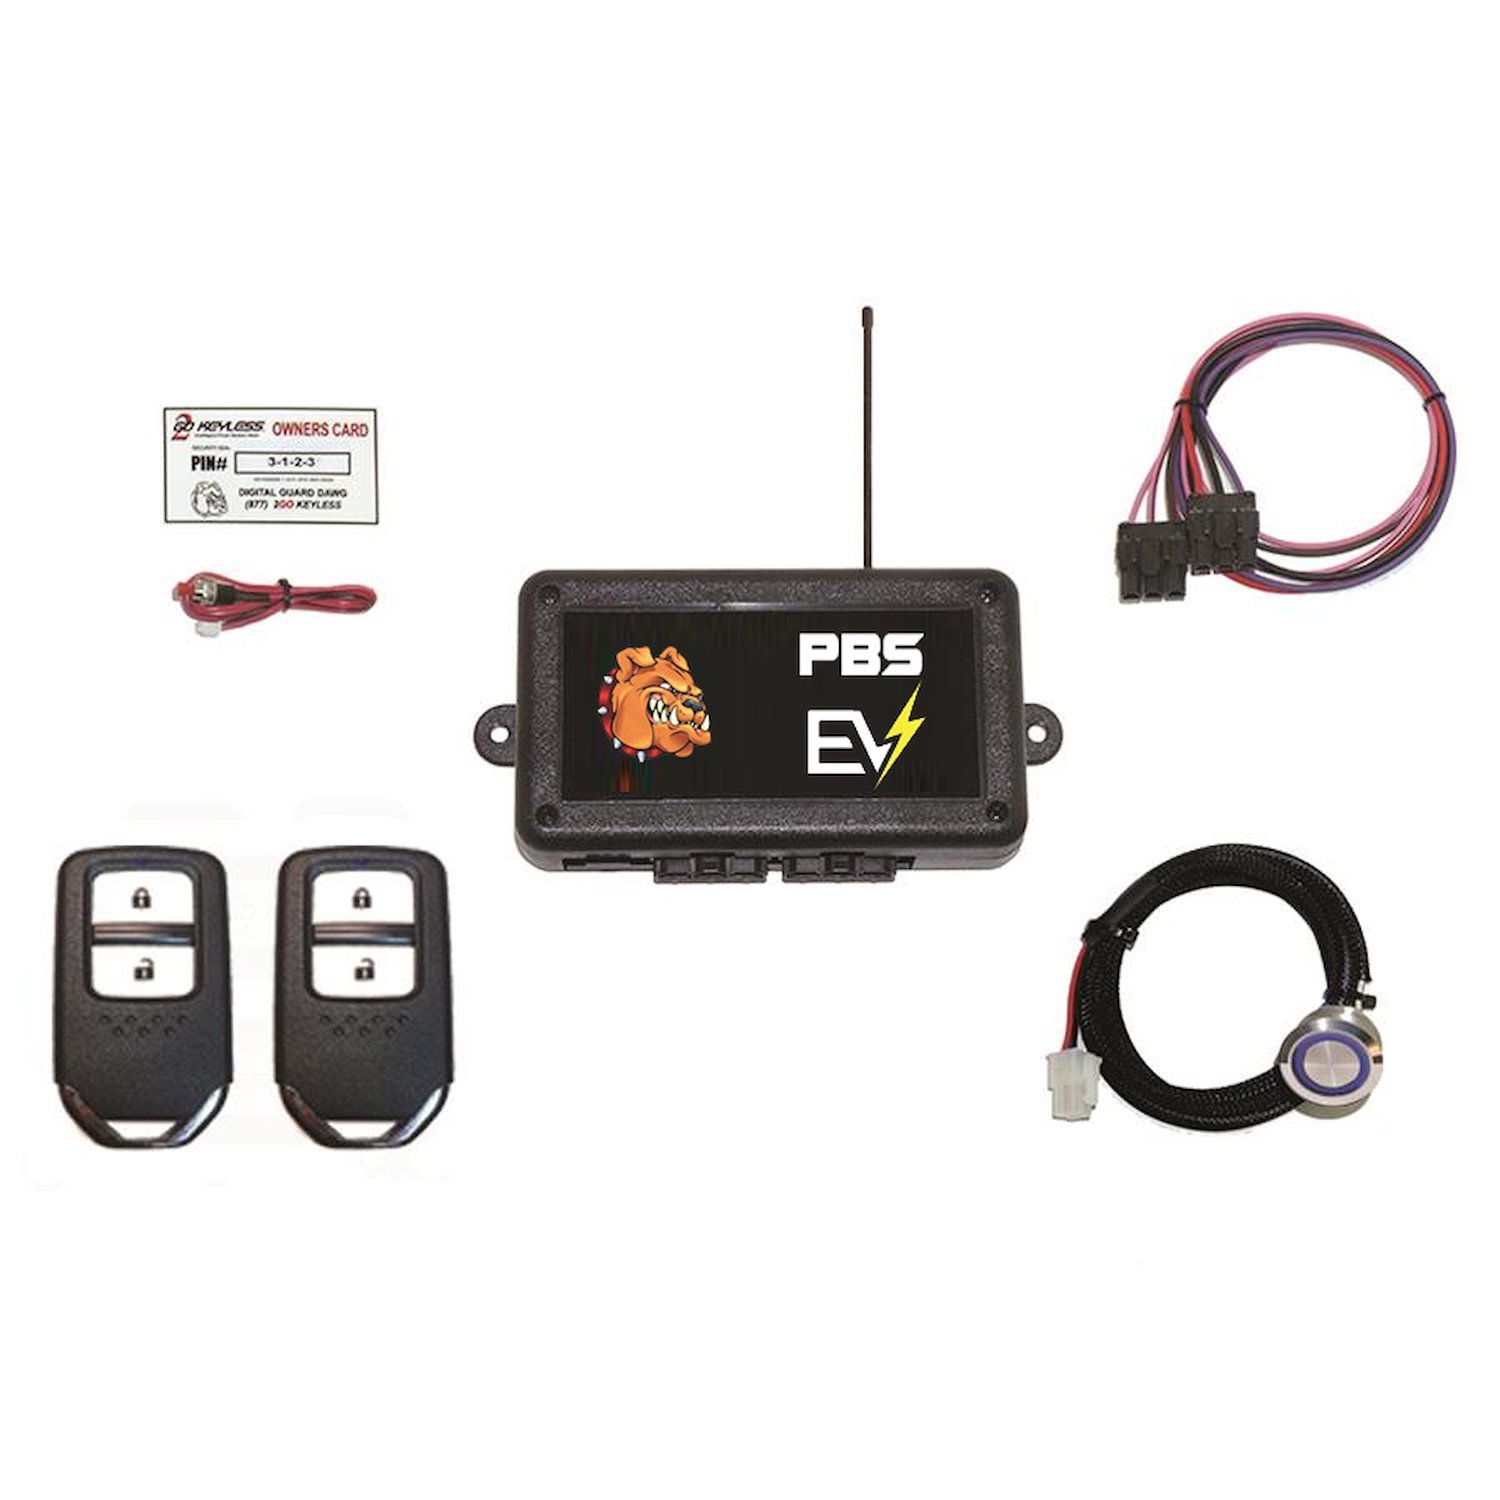 PBS-EV-II RFID Push Button Start System, Electric Motor, w/5 Channels for Classic, Customs, Hotrods, and Muscle Cars